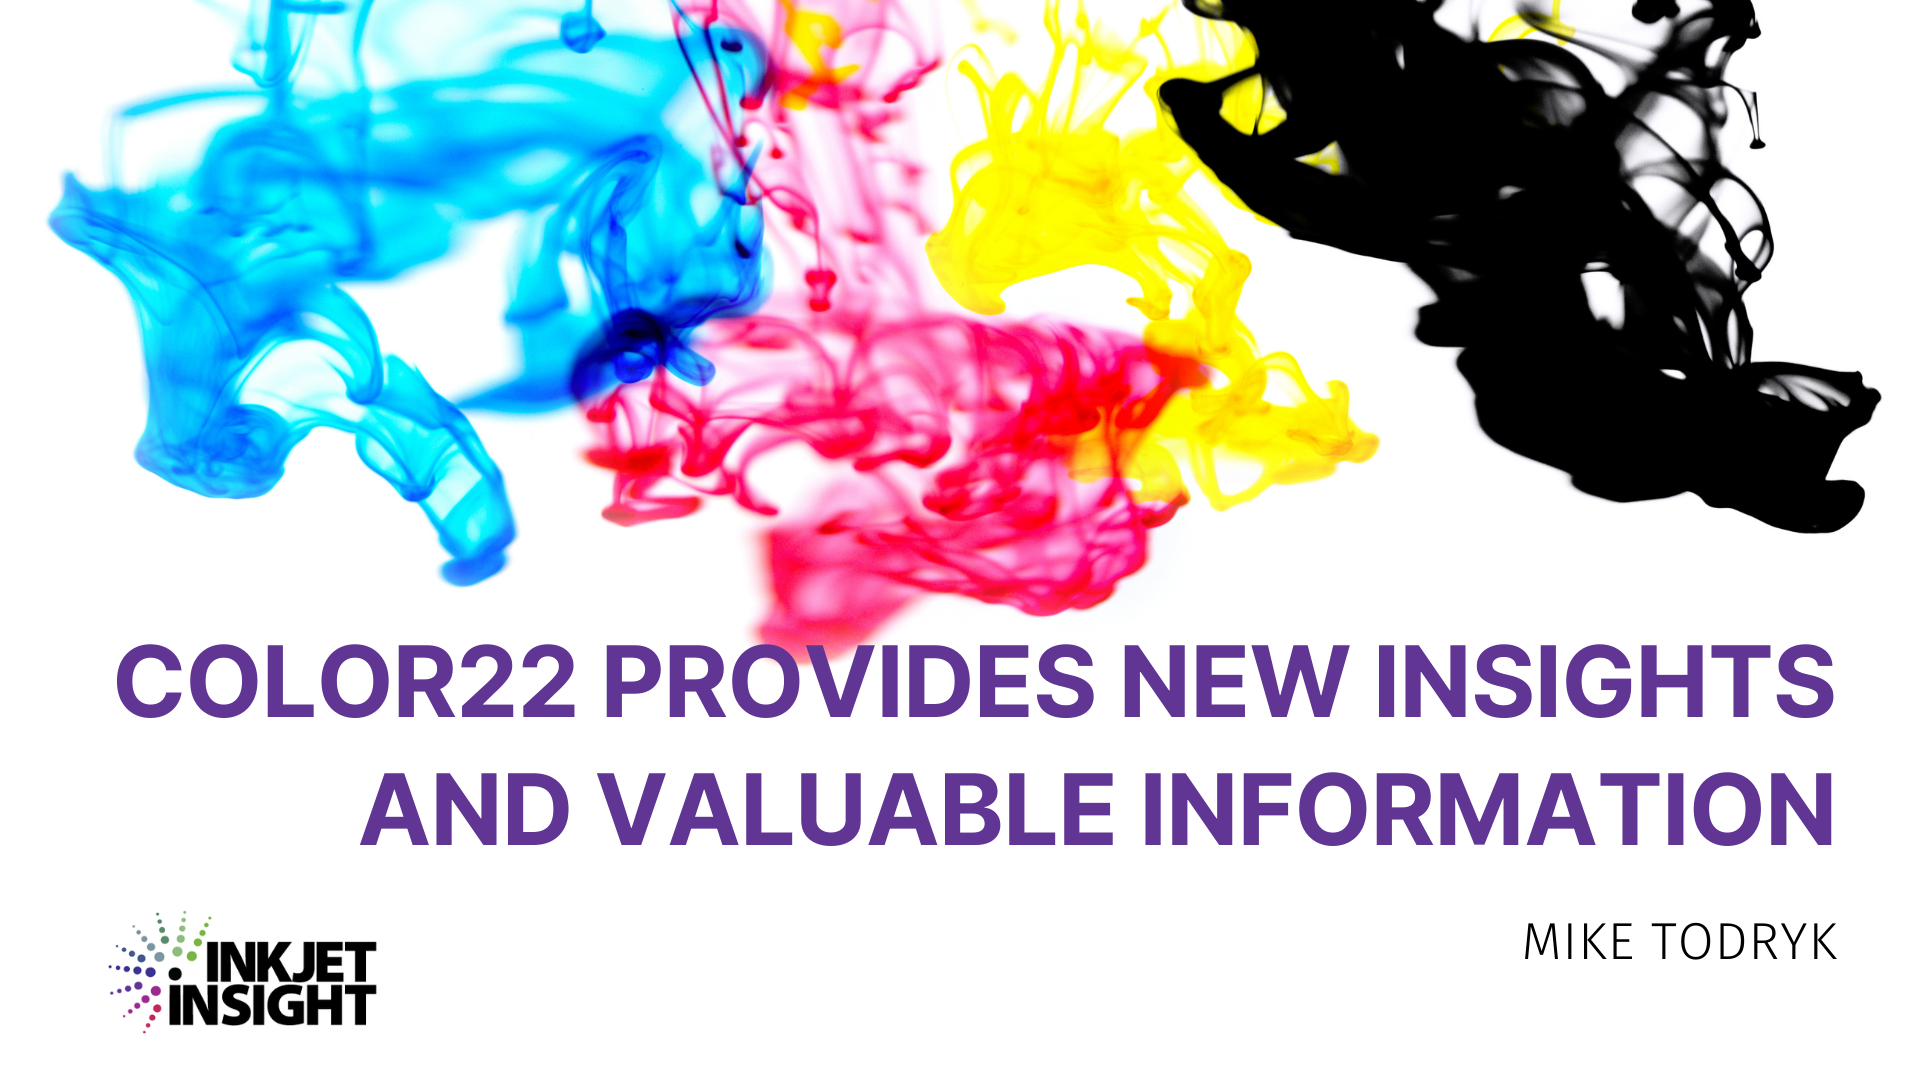 Featured image for “Color22 Provides New Insights and Valuable Information”